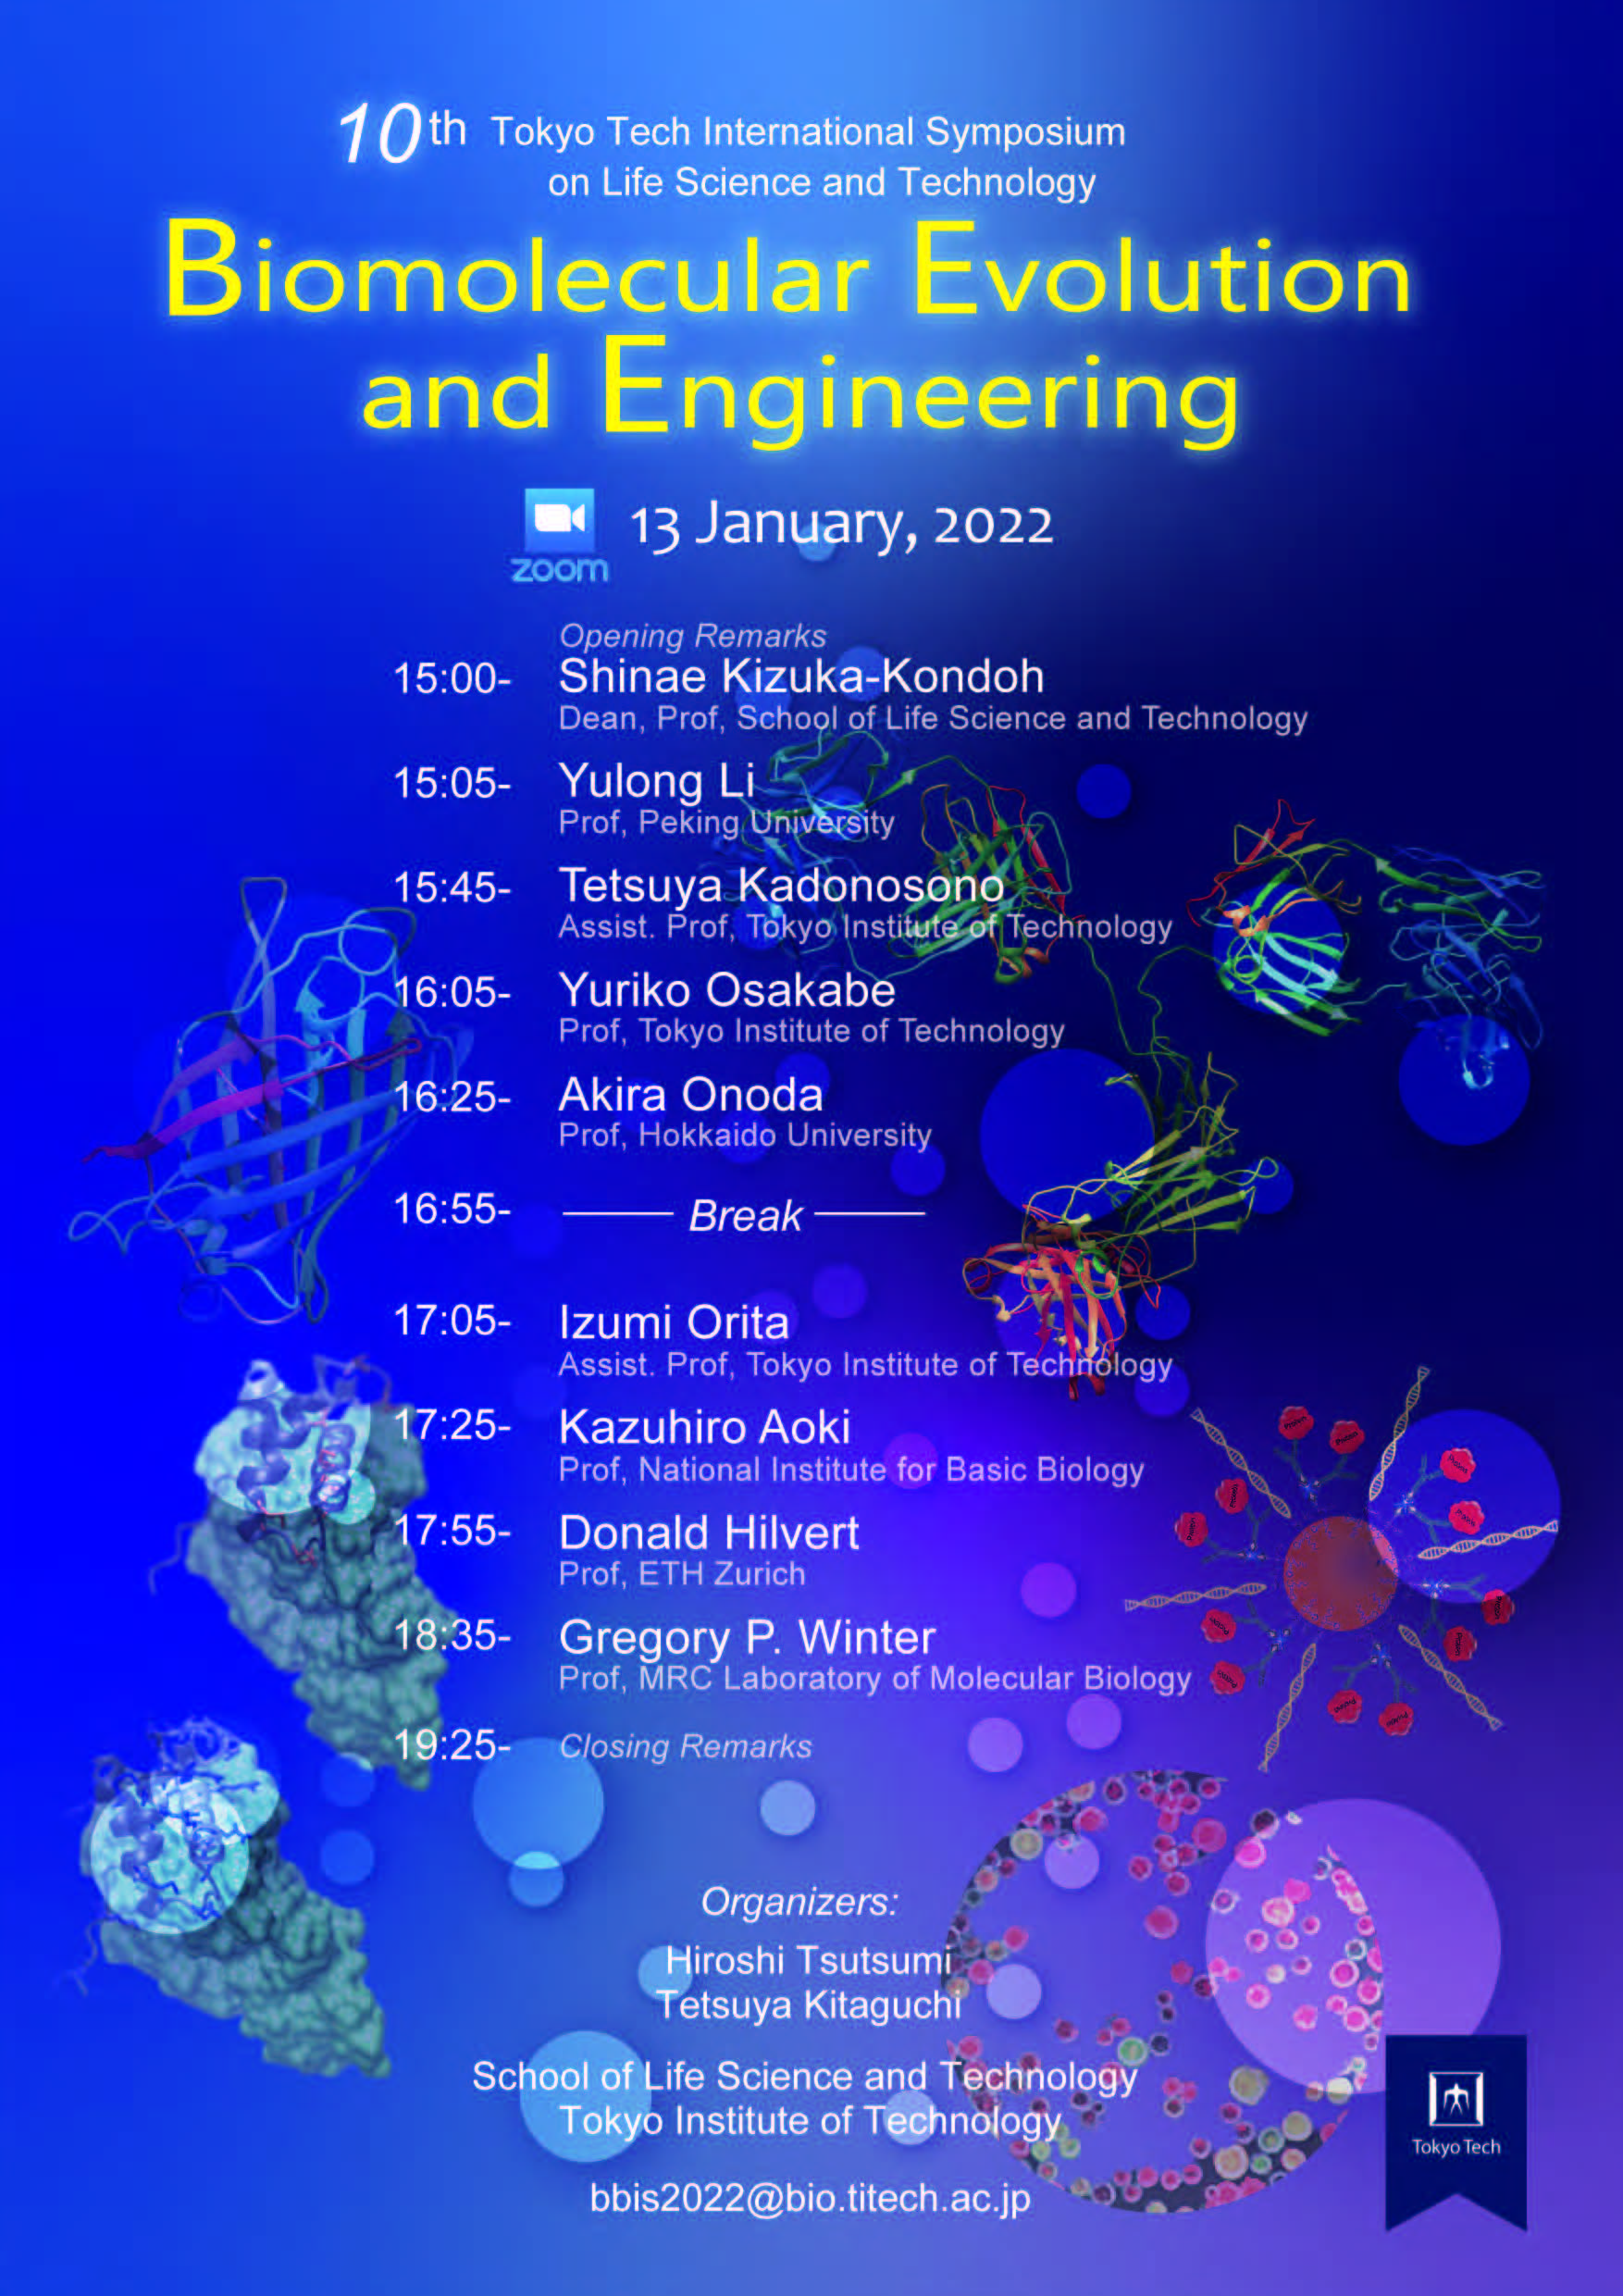 10th Tokyo Tech International Symposium on Life Science and Technology Poster